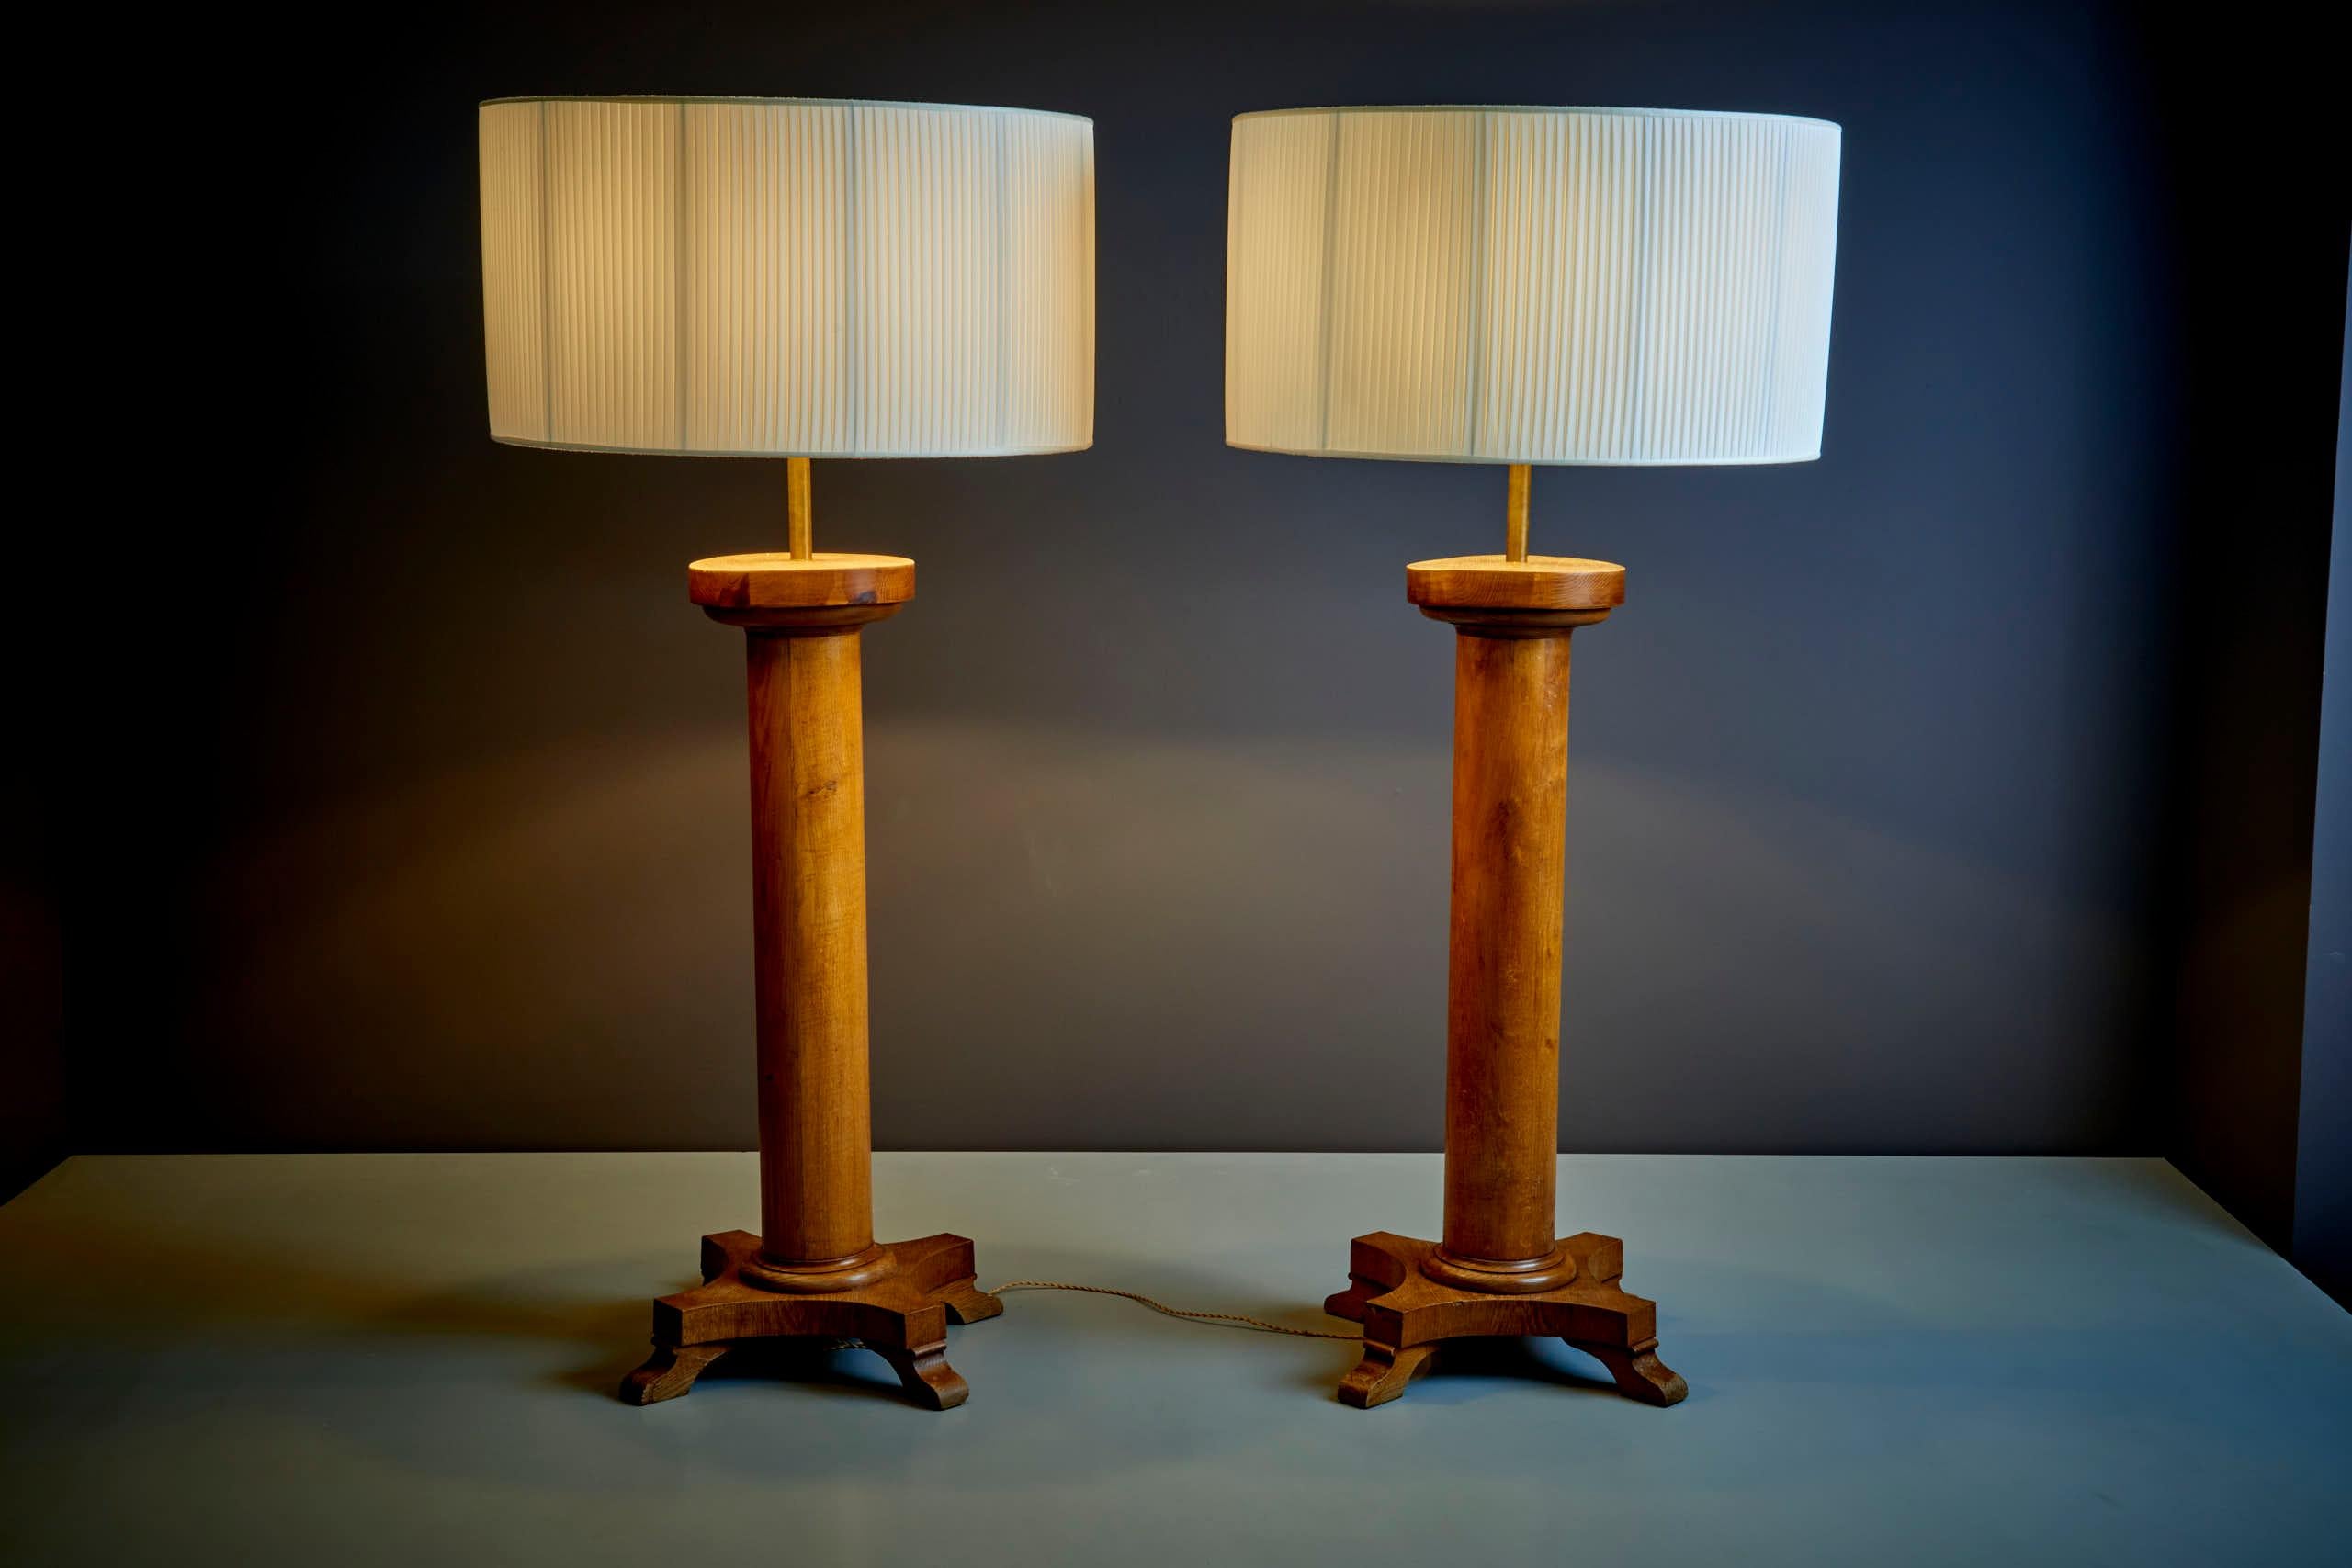 Pair of Gigantic Floor Lamps with beautiful Oak base, Italy - 1940s. The measurements given apply to the lamp base without the shade.

Please note: Lamp should be fitted professionally in accordance to local requirements.